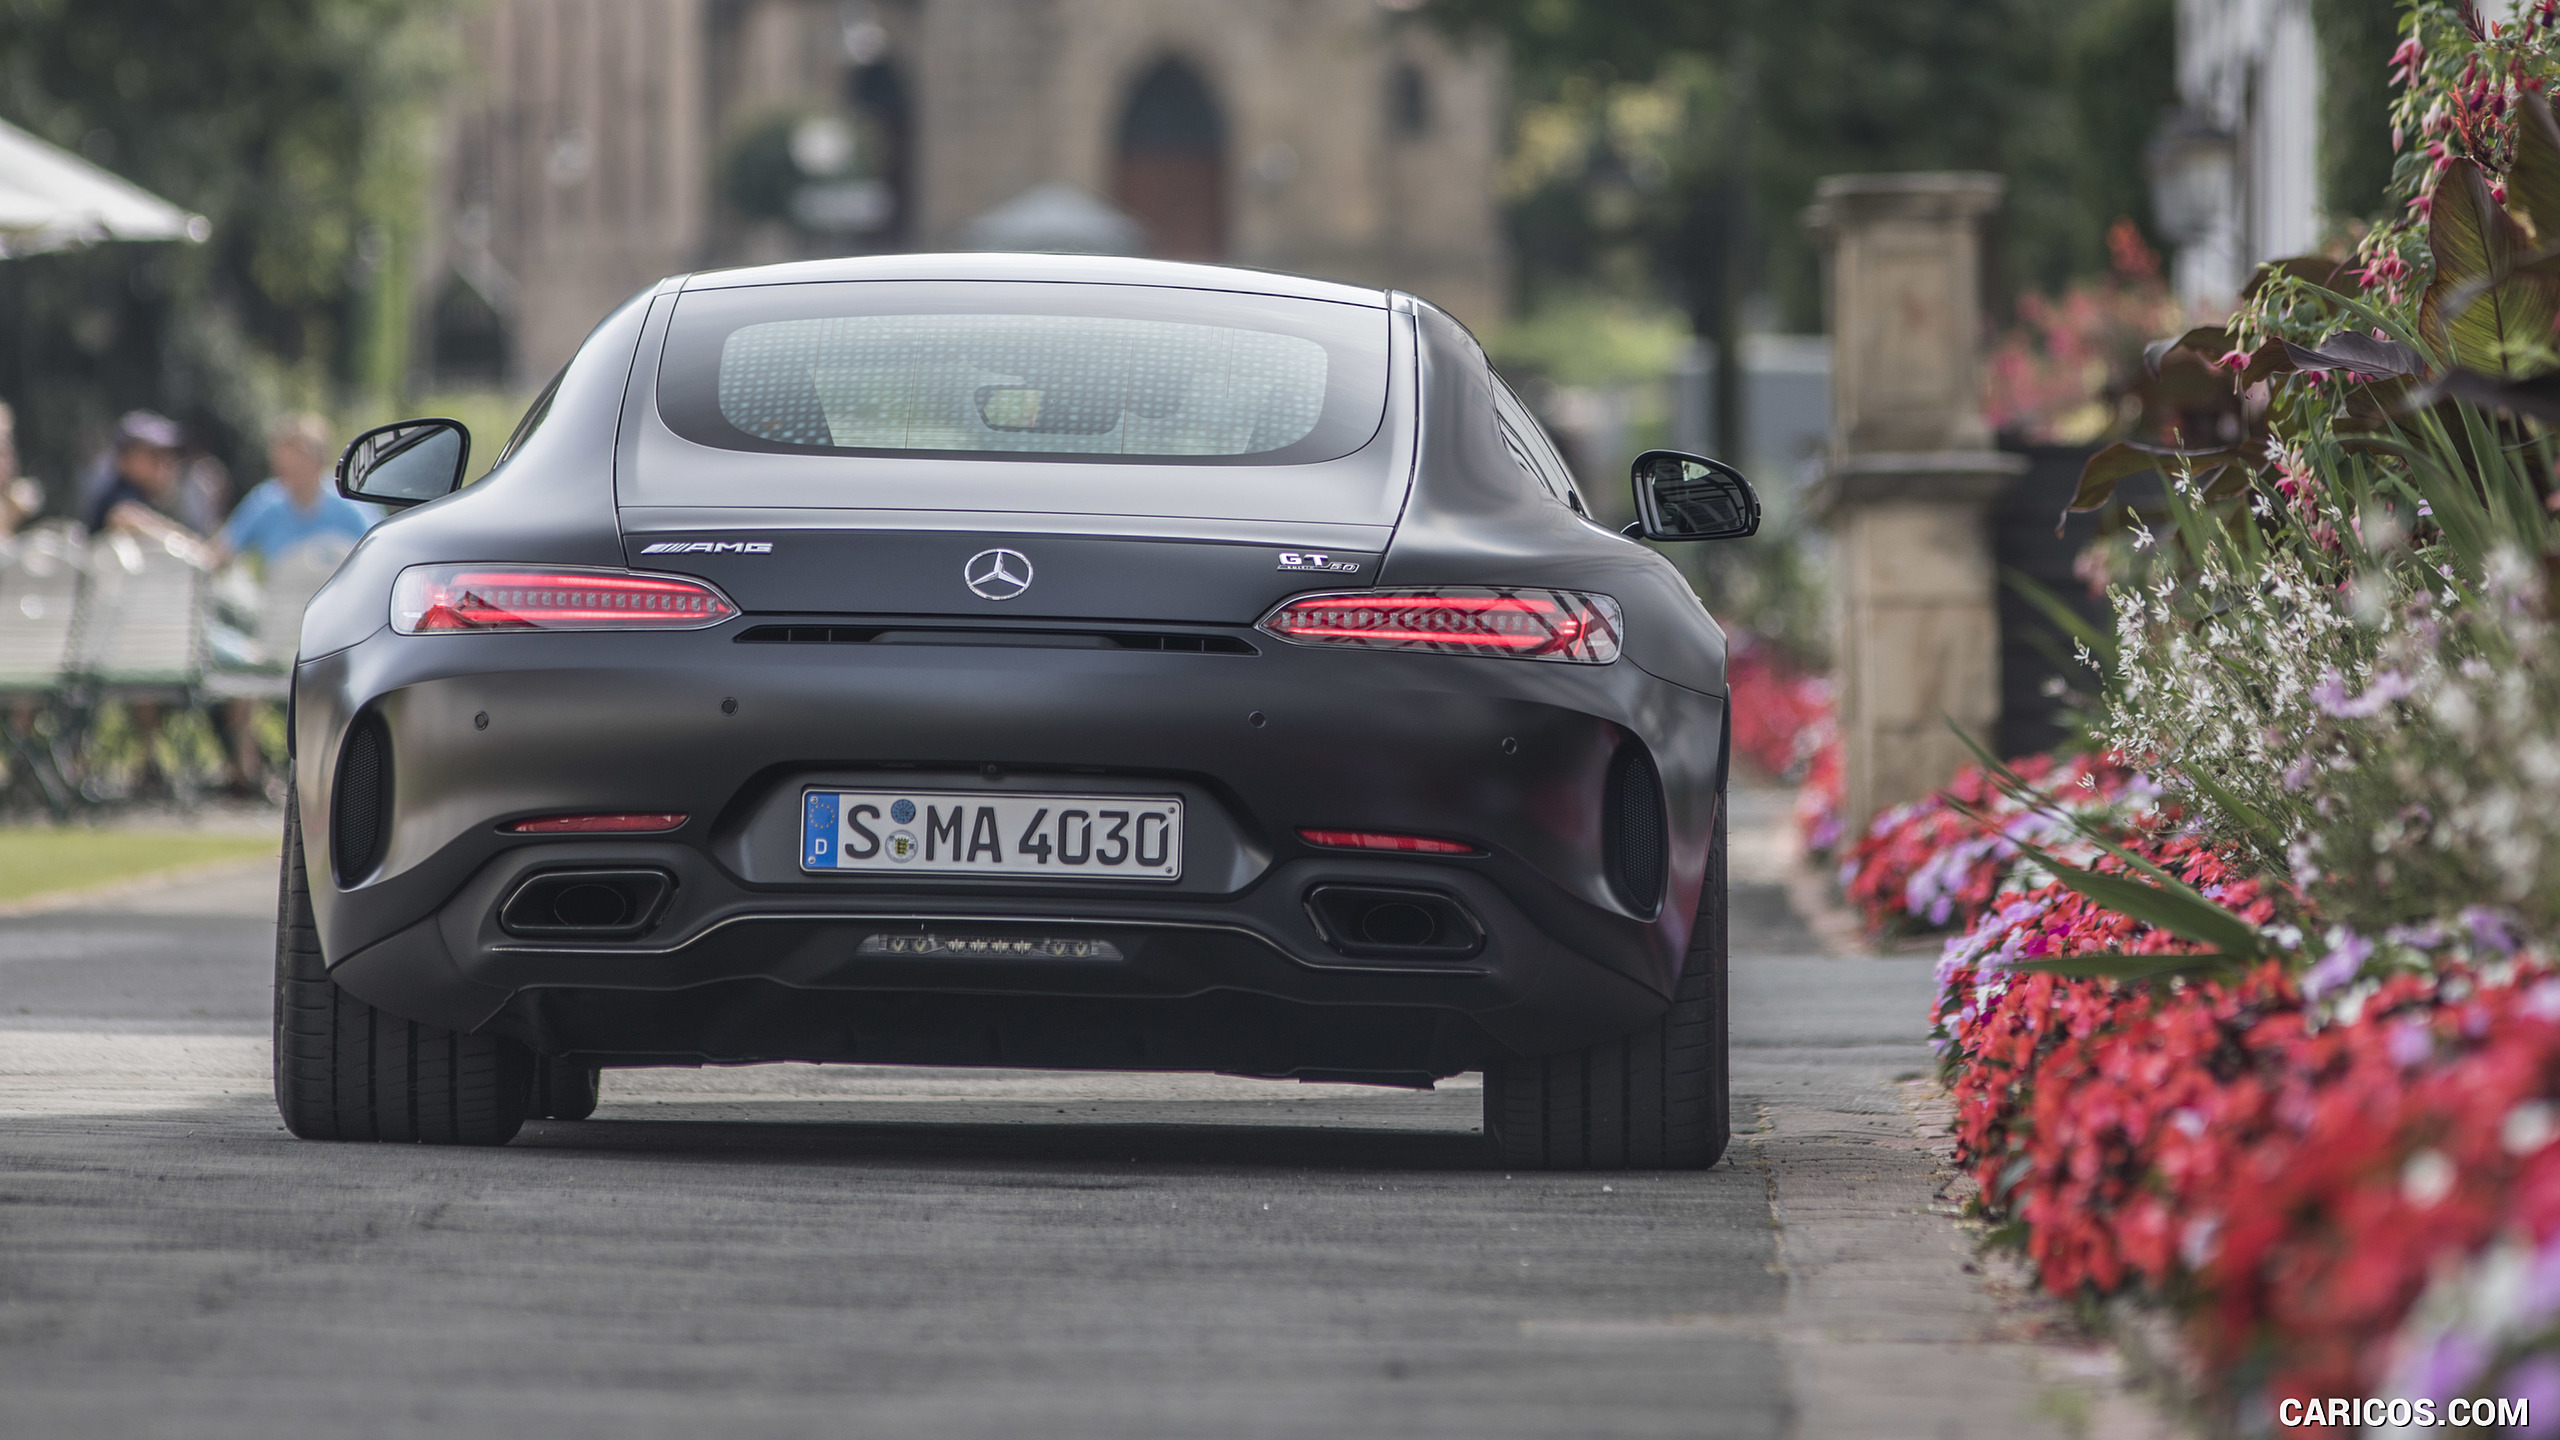 2018 Mercedes-AMG GT C Coupe Edition 50 - Rear, #27 of 70